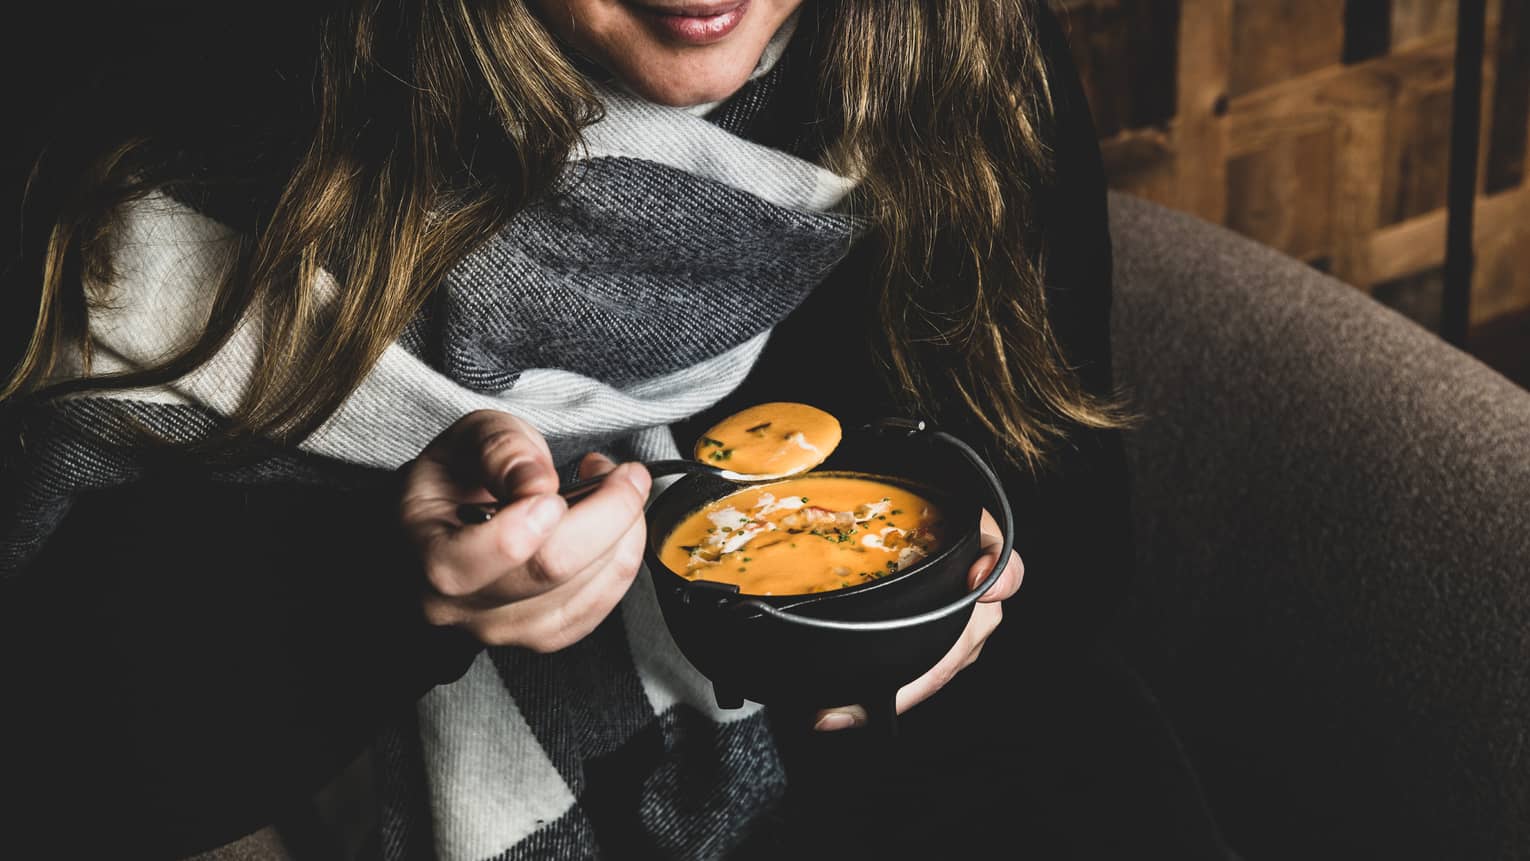 A woman with long light-brown hair and wearing a black jacket and grey-and-white scarf holds a cauldron-style bowl of orange-colored soup in one hand and a silver spoon in the other